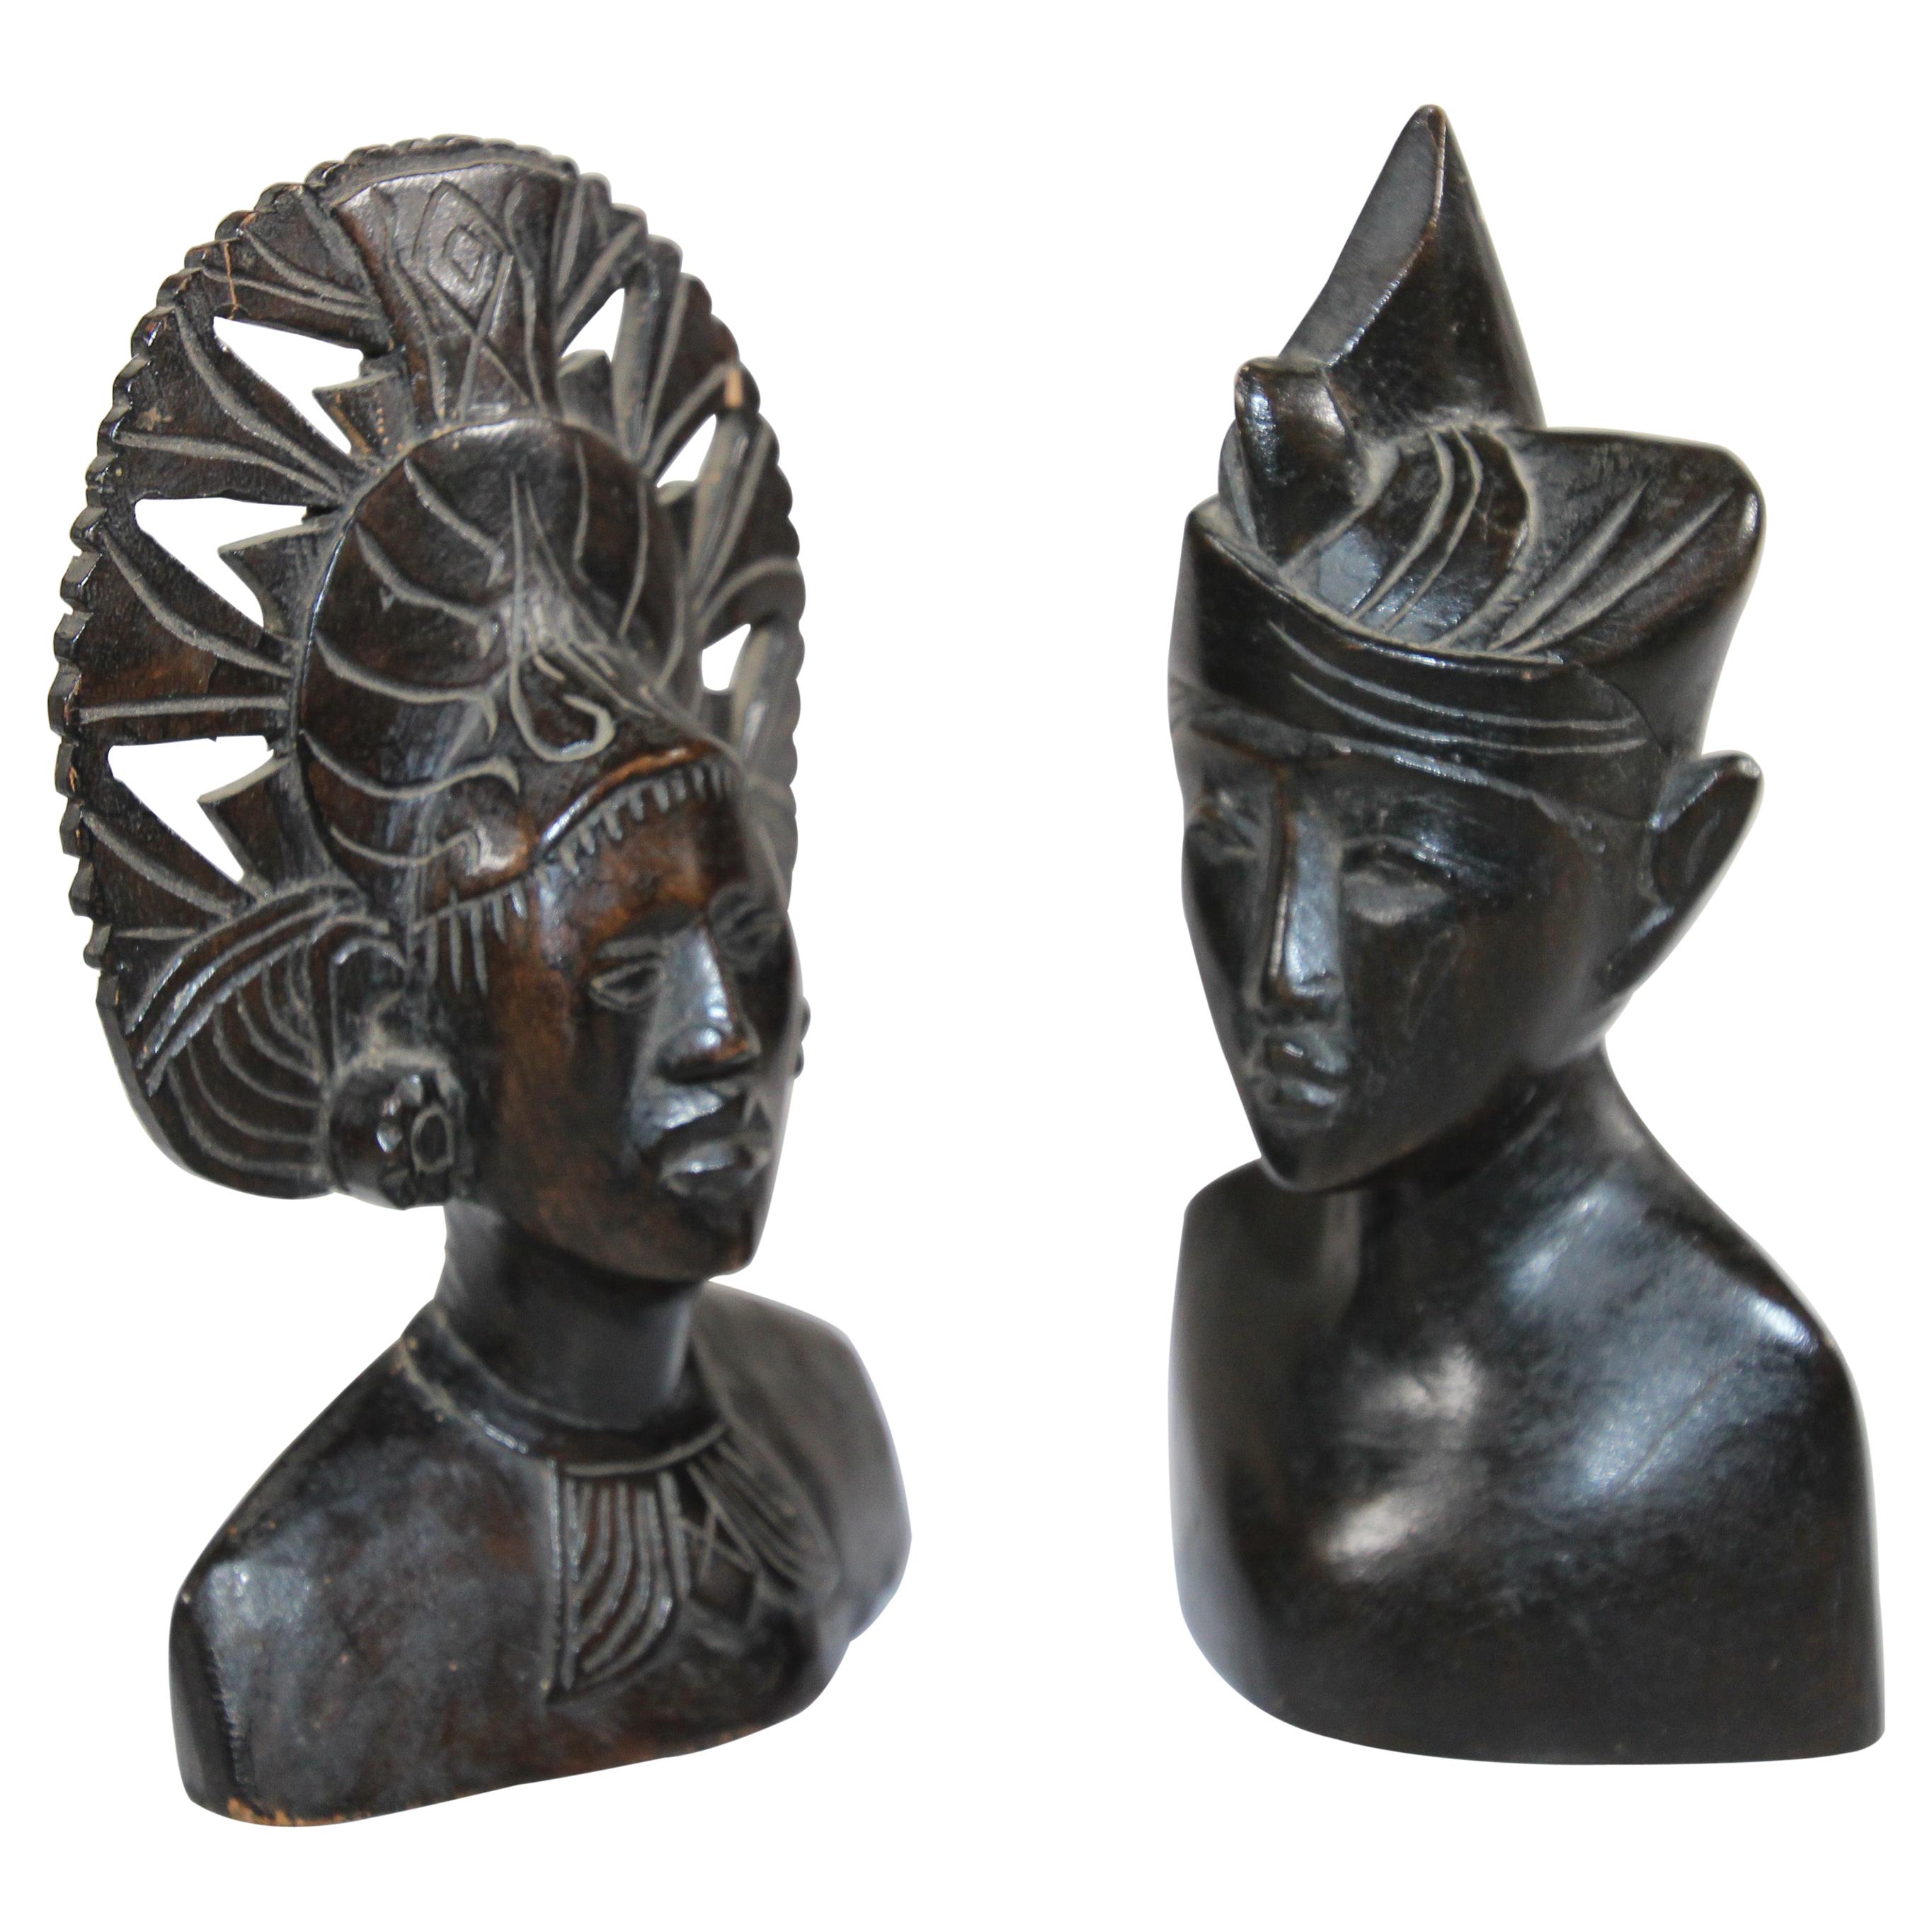 Hand Carved Wooden Balinese Busts Sculptures